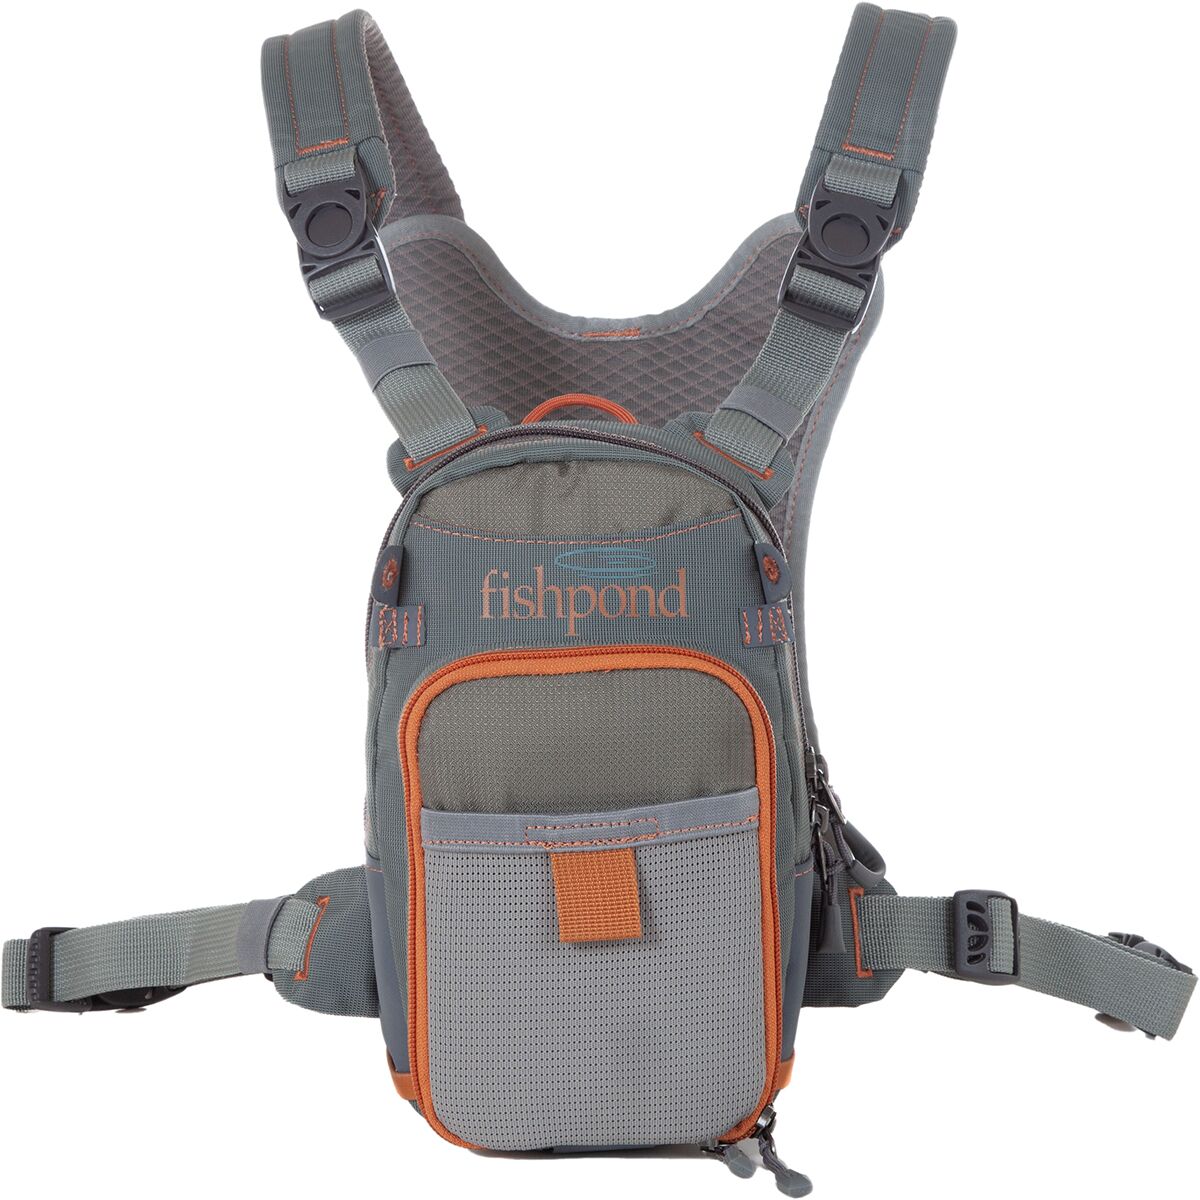 Fishpond Canyon Creek Chest Pack - Travel